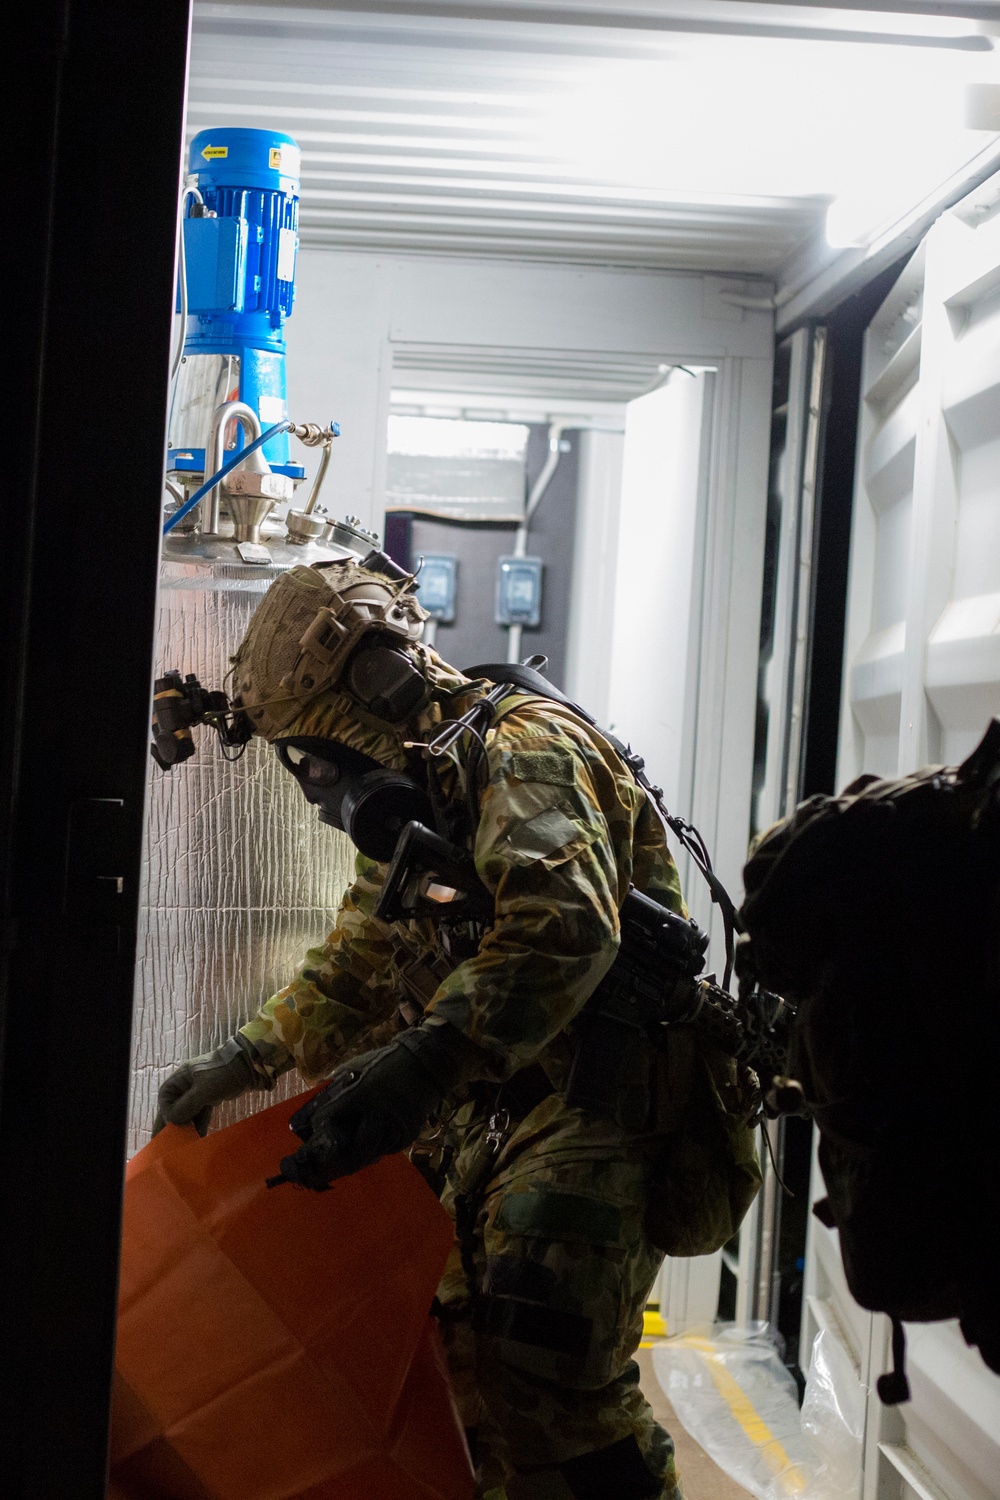 U.S. and Australian Special Operations Forces (SOF) in Talisman Saber 2019